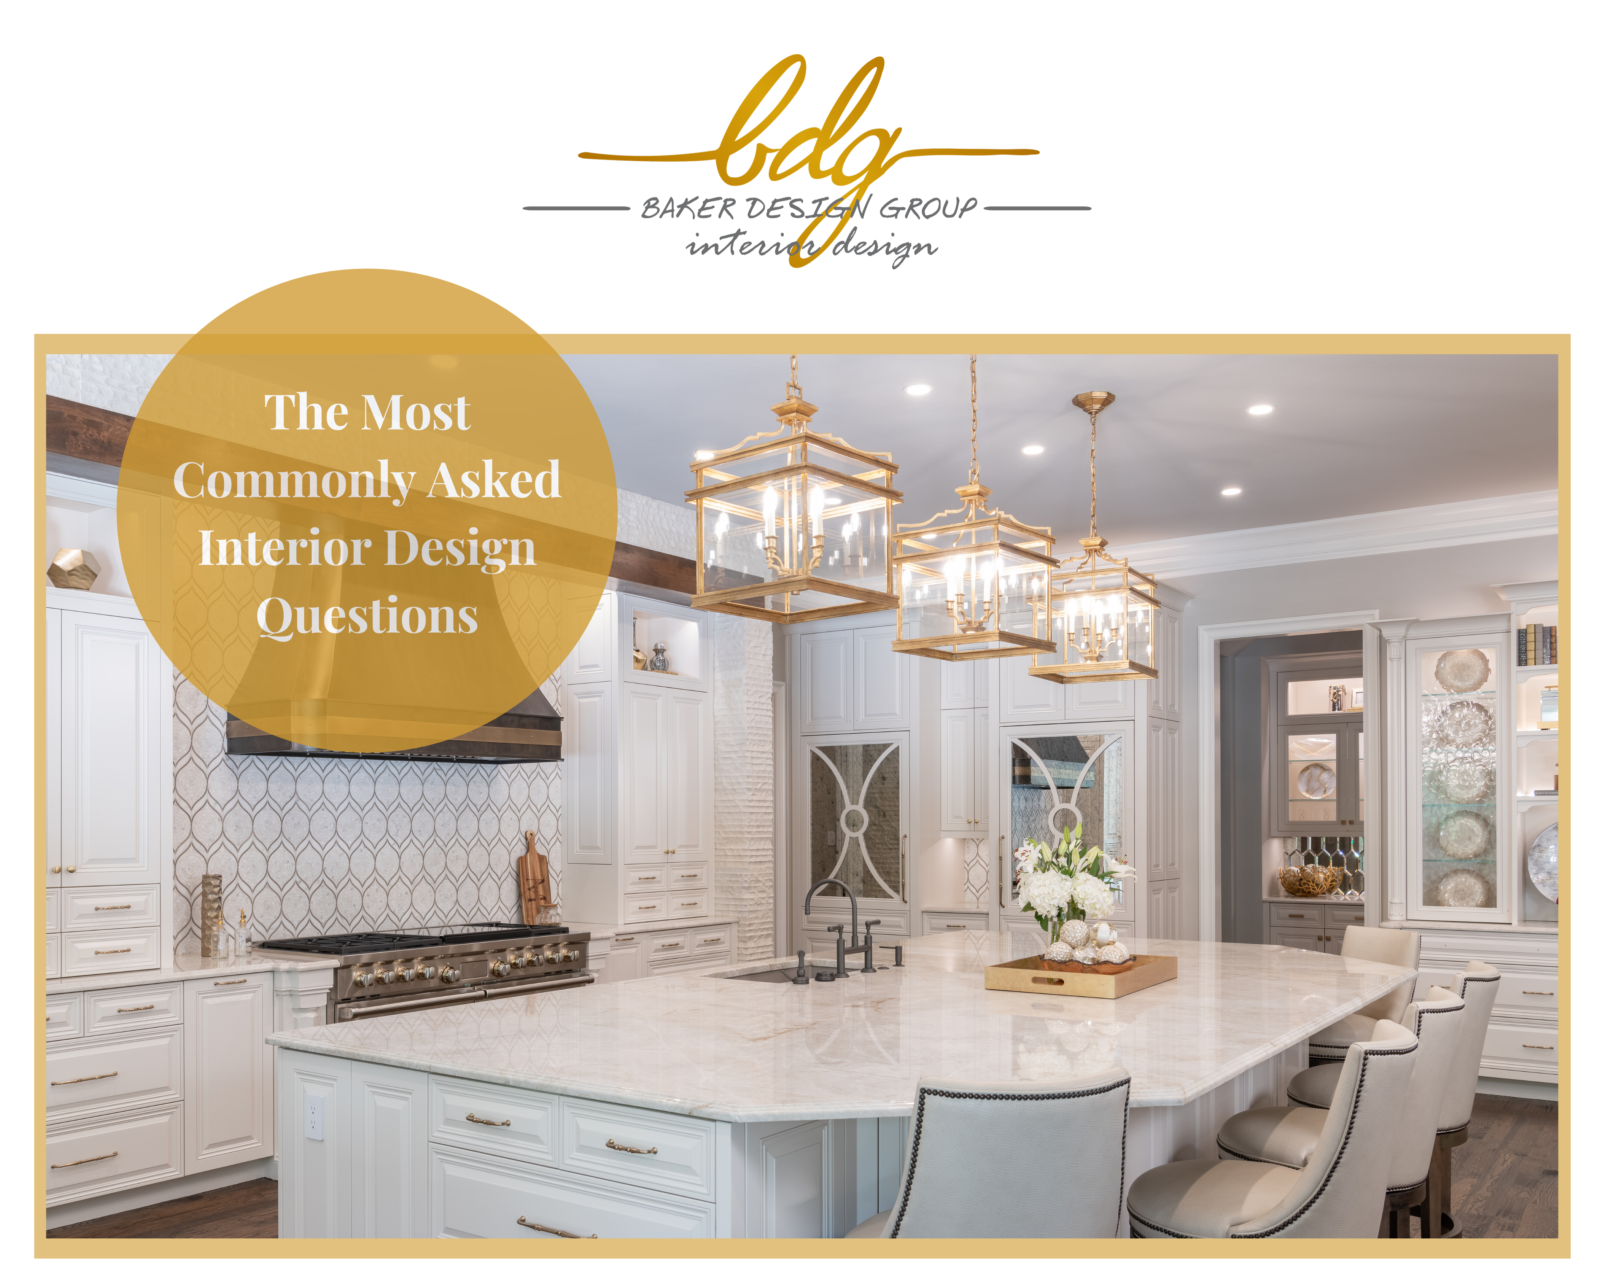 Baker Design Group - The Most Commonly Asked Interior Design Questions